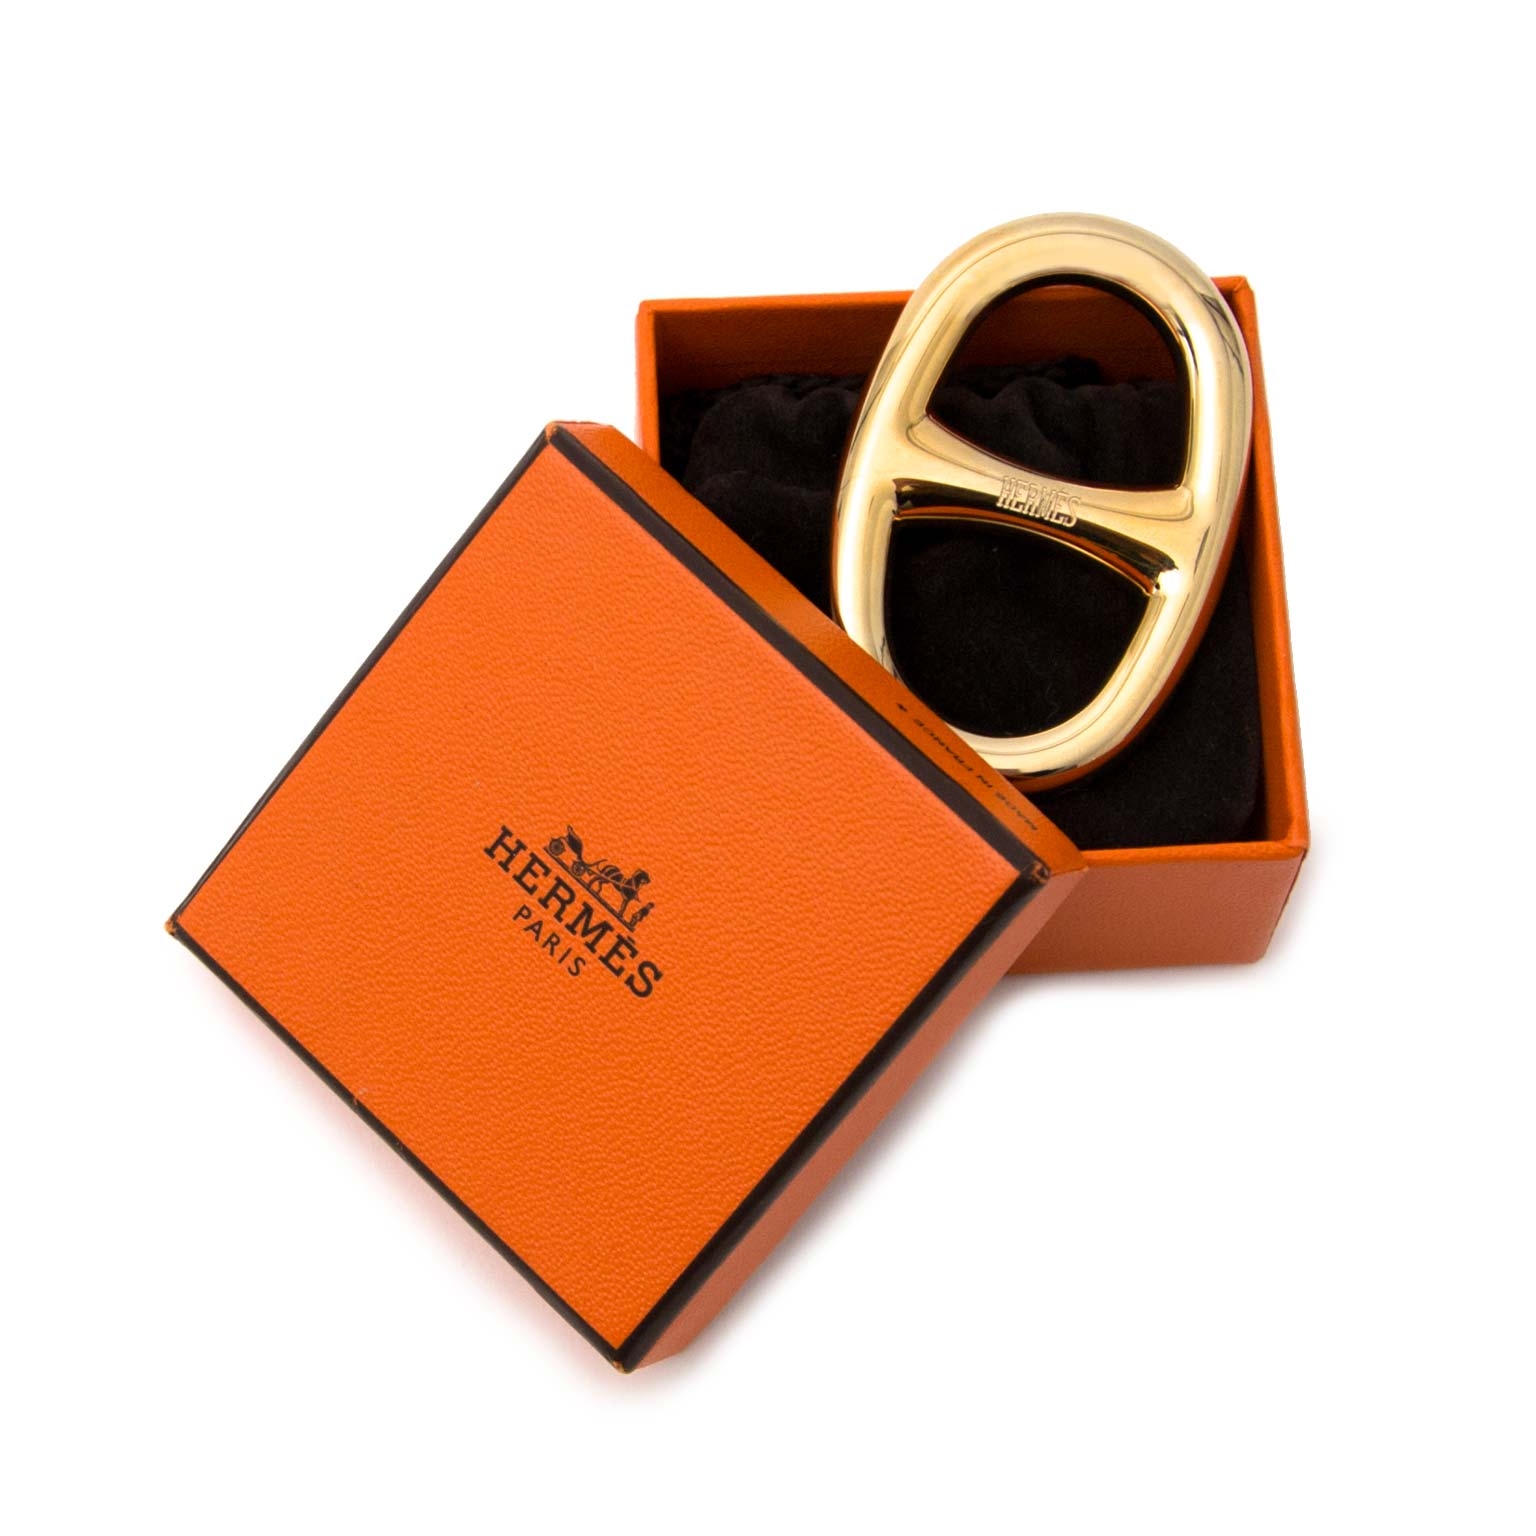 Shop HERMES Chaine dAncre Chaine d'ancre scarf ring (H601373S